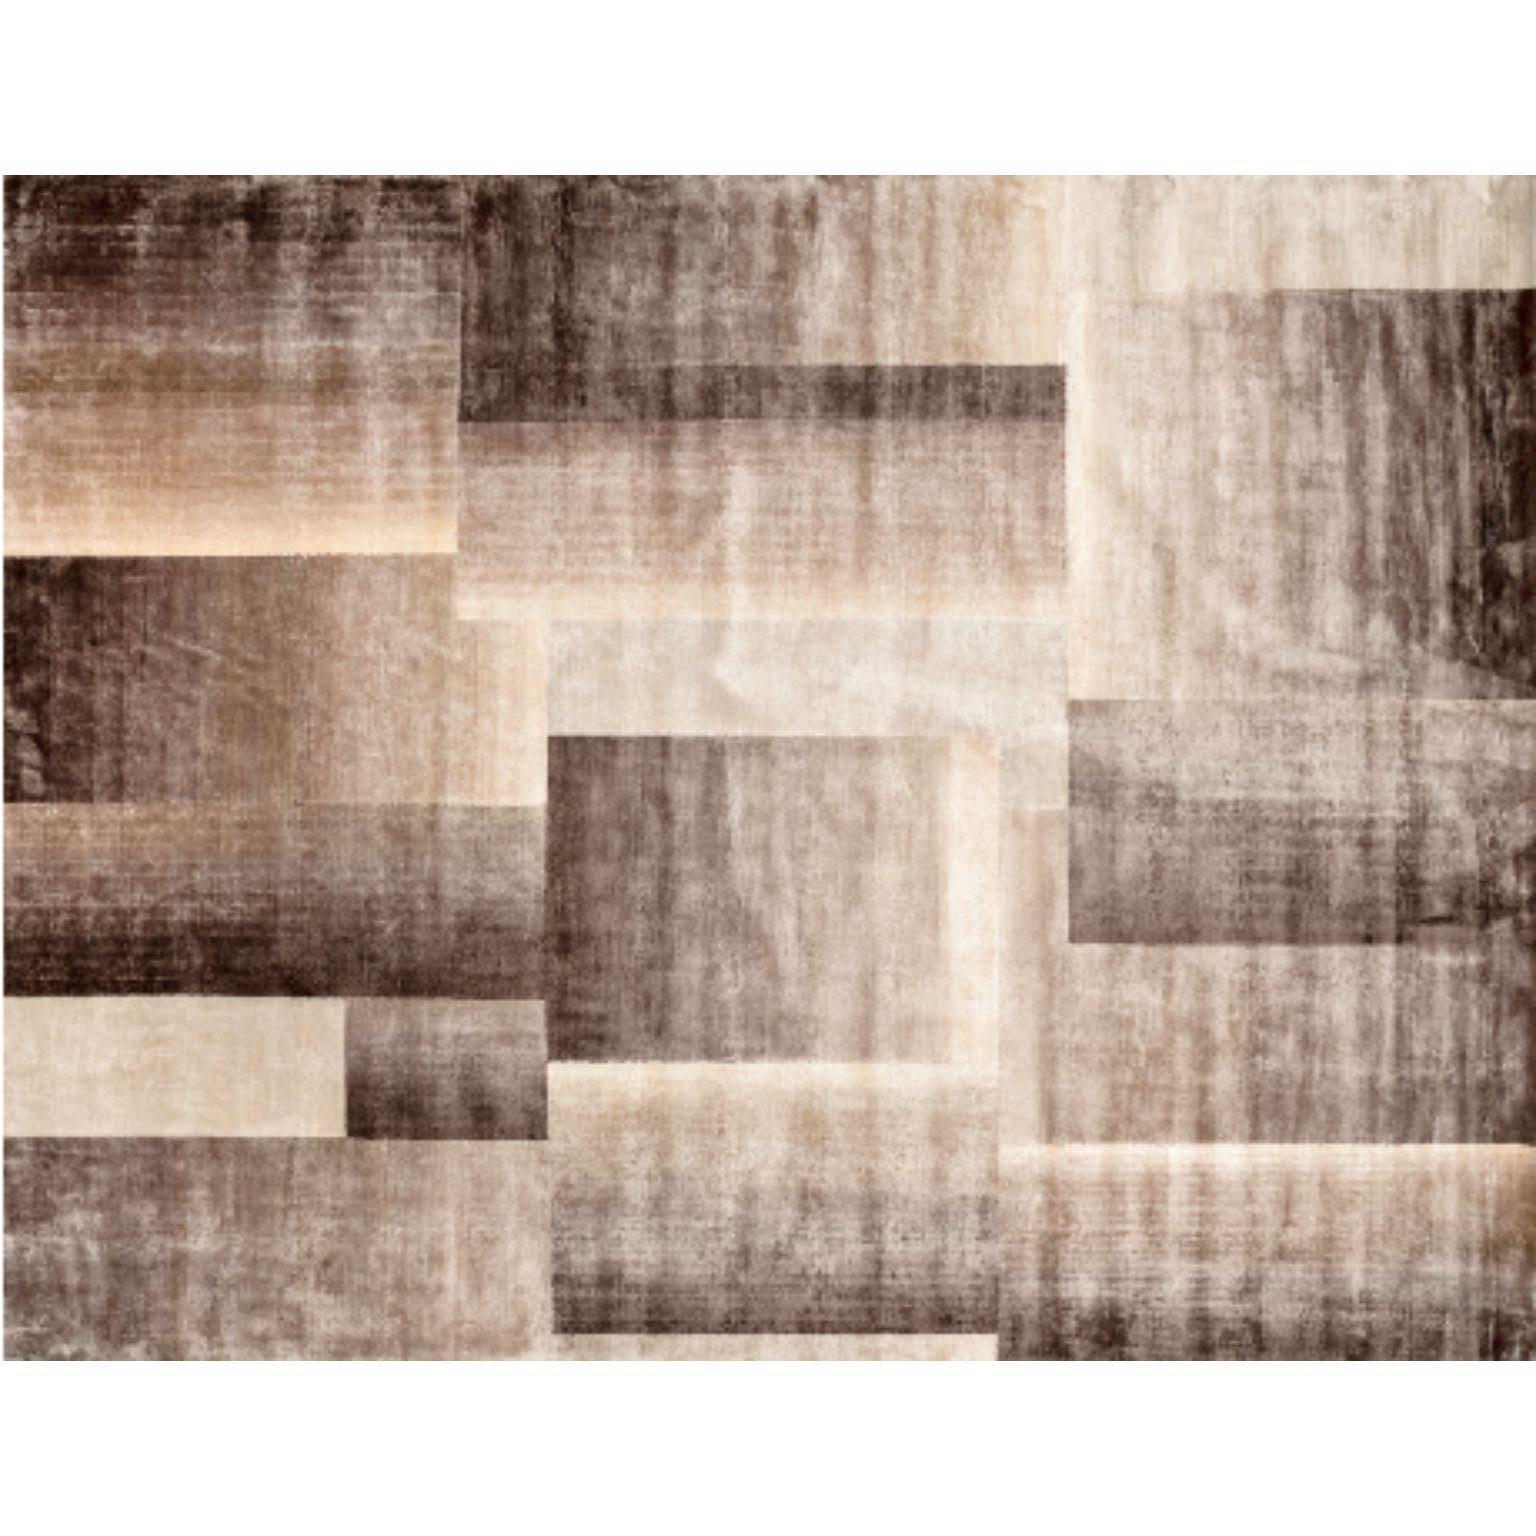 PACIFICO 400 rug by Illulian
Dimensions: D400 x H300 cm 
Materials: wool 50%, silk 50%
Variations available and prices may vary according to materials and sizes.

Illulian, historic and prestigious rug company brand, internationally renowned in